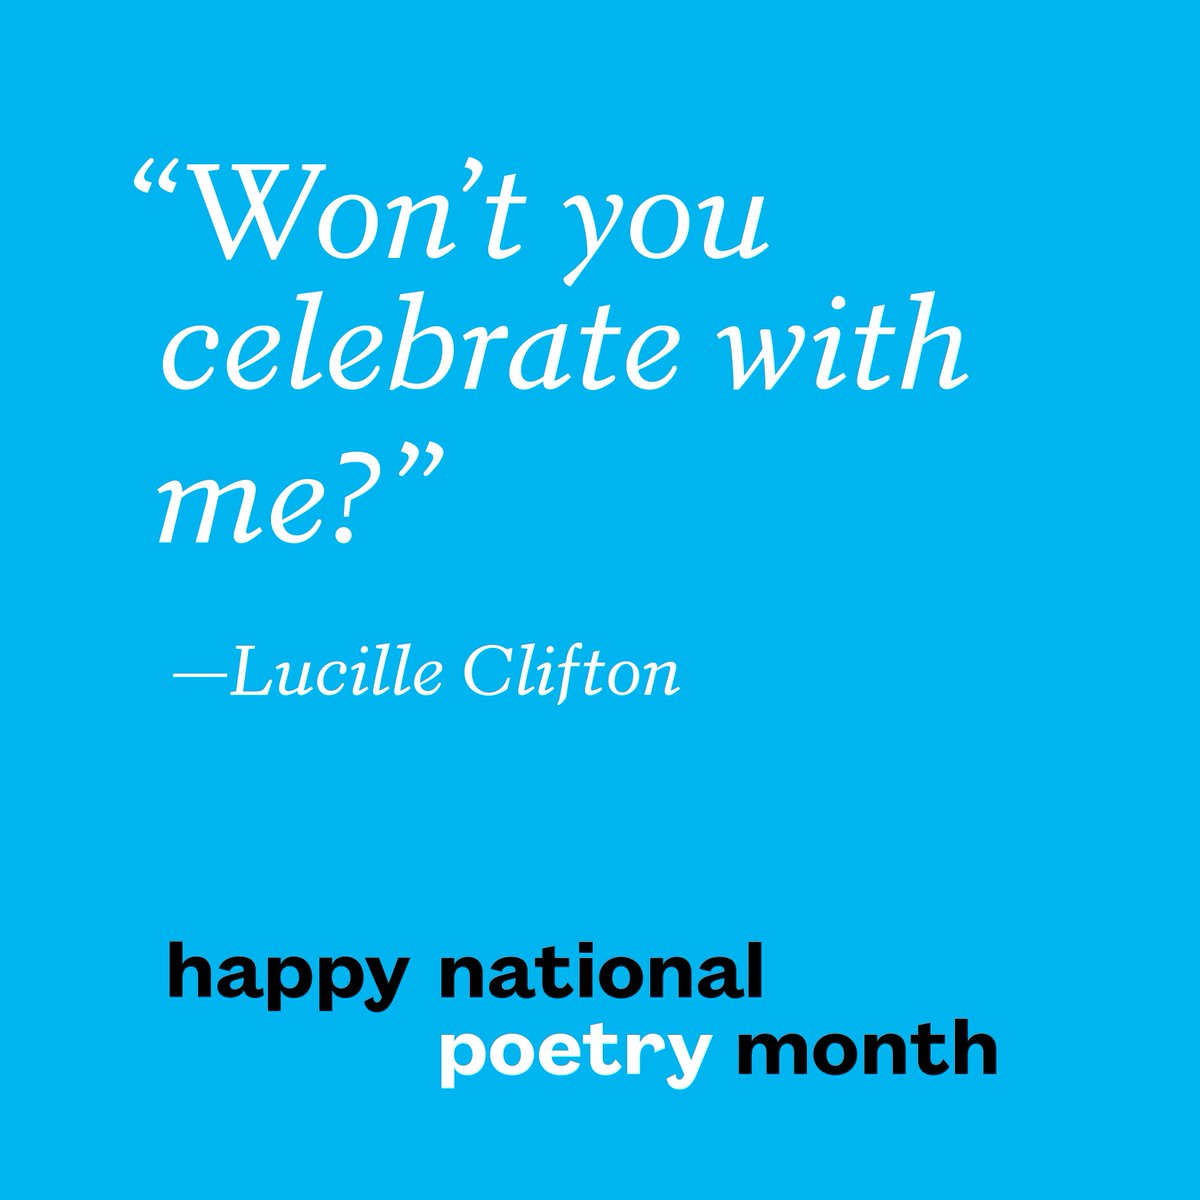 Happy #nationalpoetrymonth! We're proud to have launched this celebration in 1996 and to still be the official information hub for National Poetry Month today. Join us in celebrating with poems, poetry events, teacher resources, and more: poets.org/national-poetr…